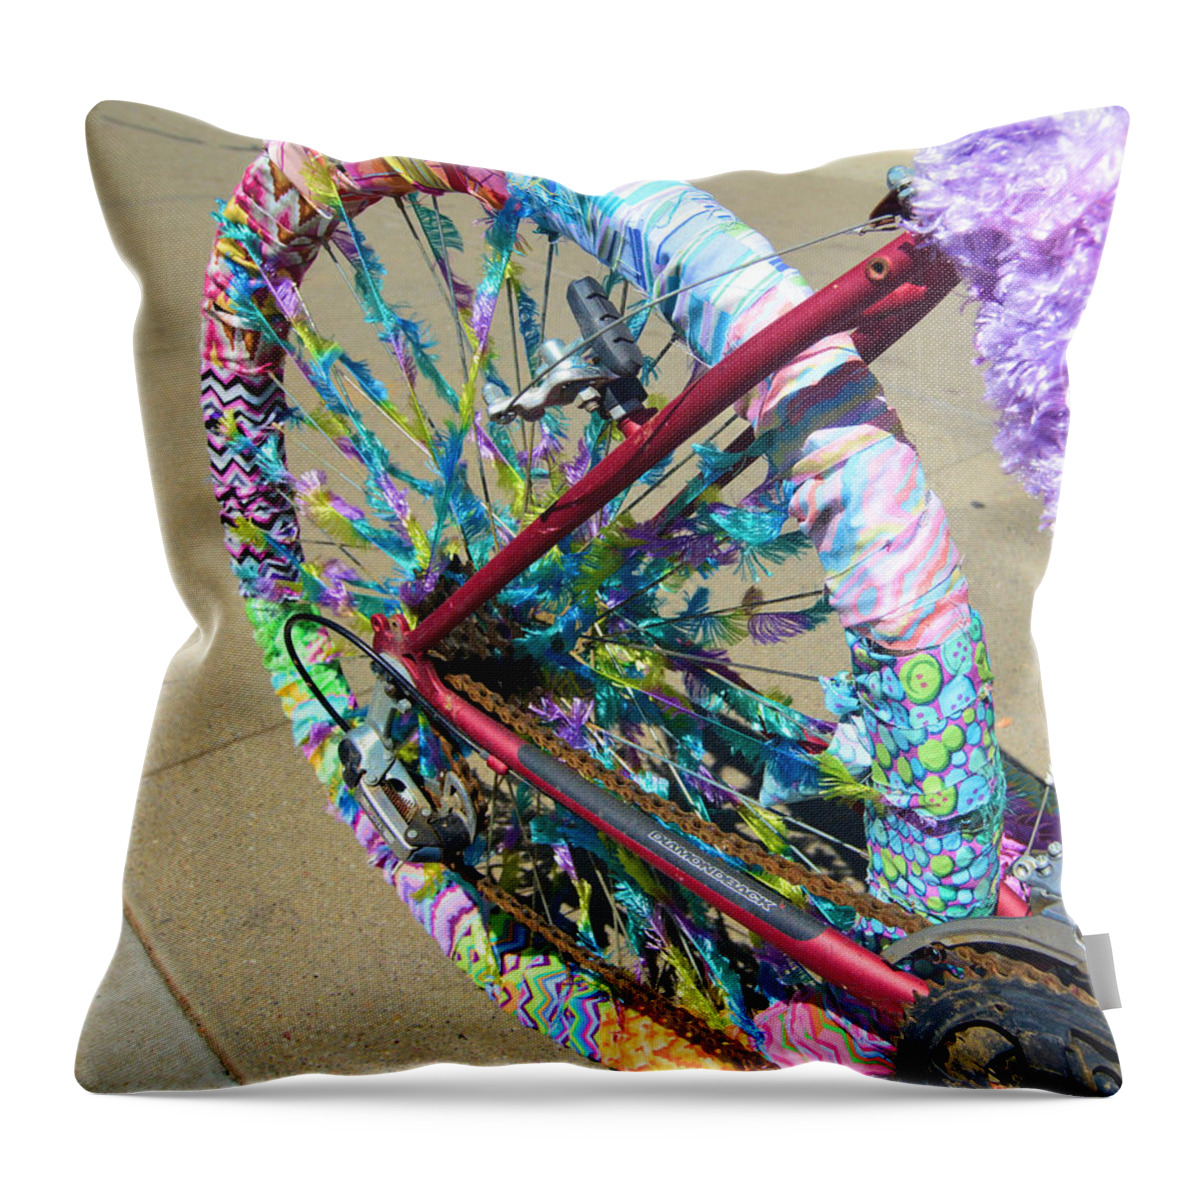 Bicycle Throw Pillow featuring the photograph Dressed Up Wheel by Josephine Buschman